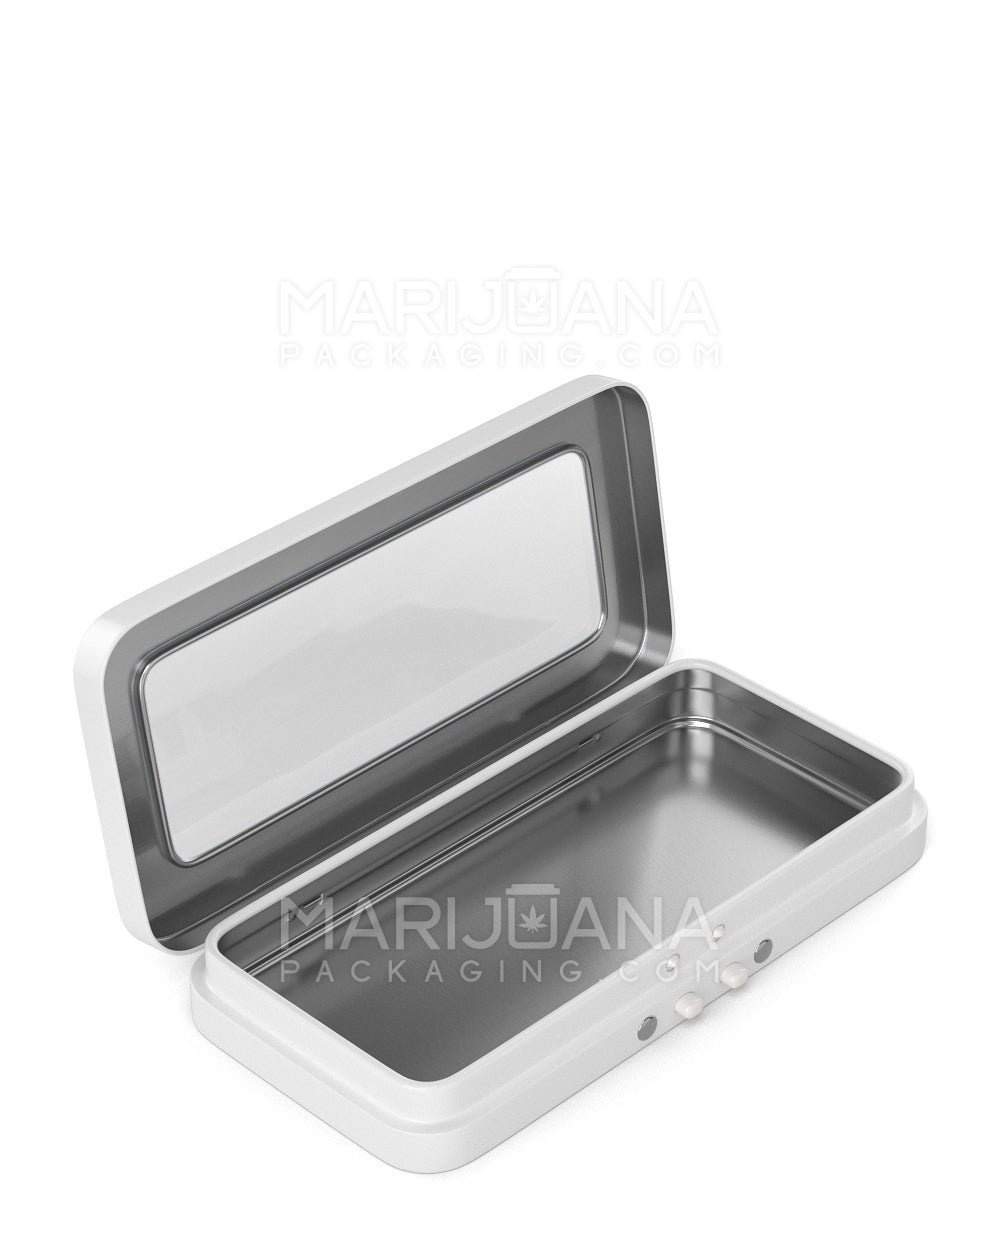 Child Resistant & Sustainable | Hinged-Lid Large Vista Edible & Joint Box w/ See-Through Window |  White Tin  - 1